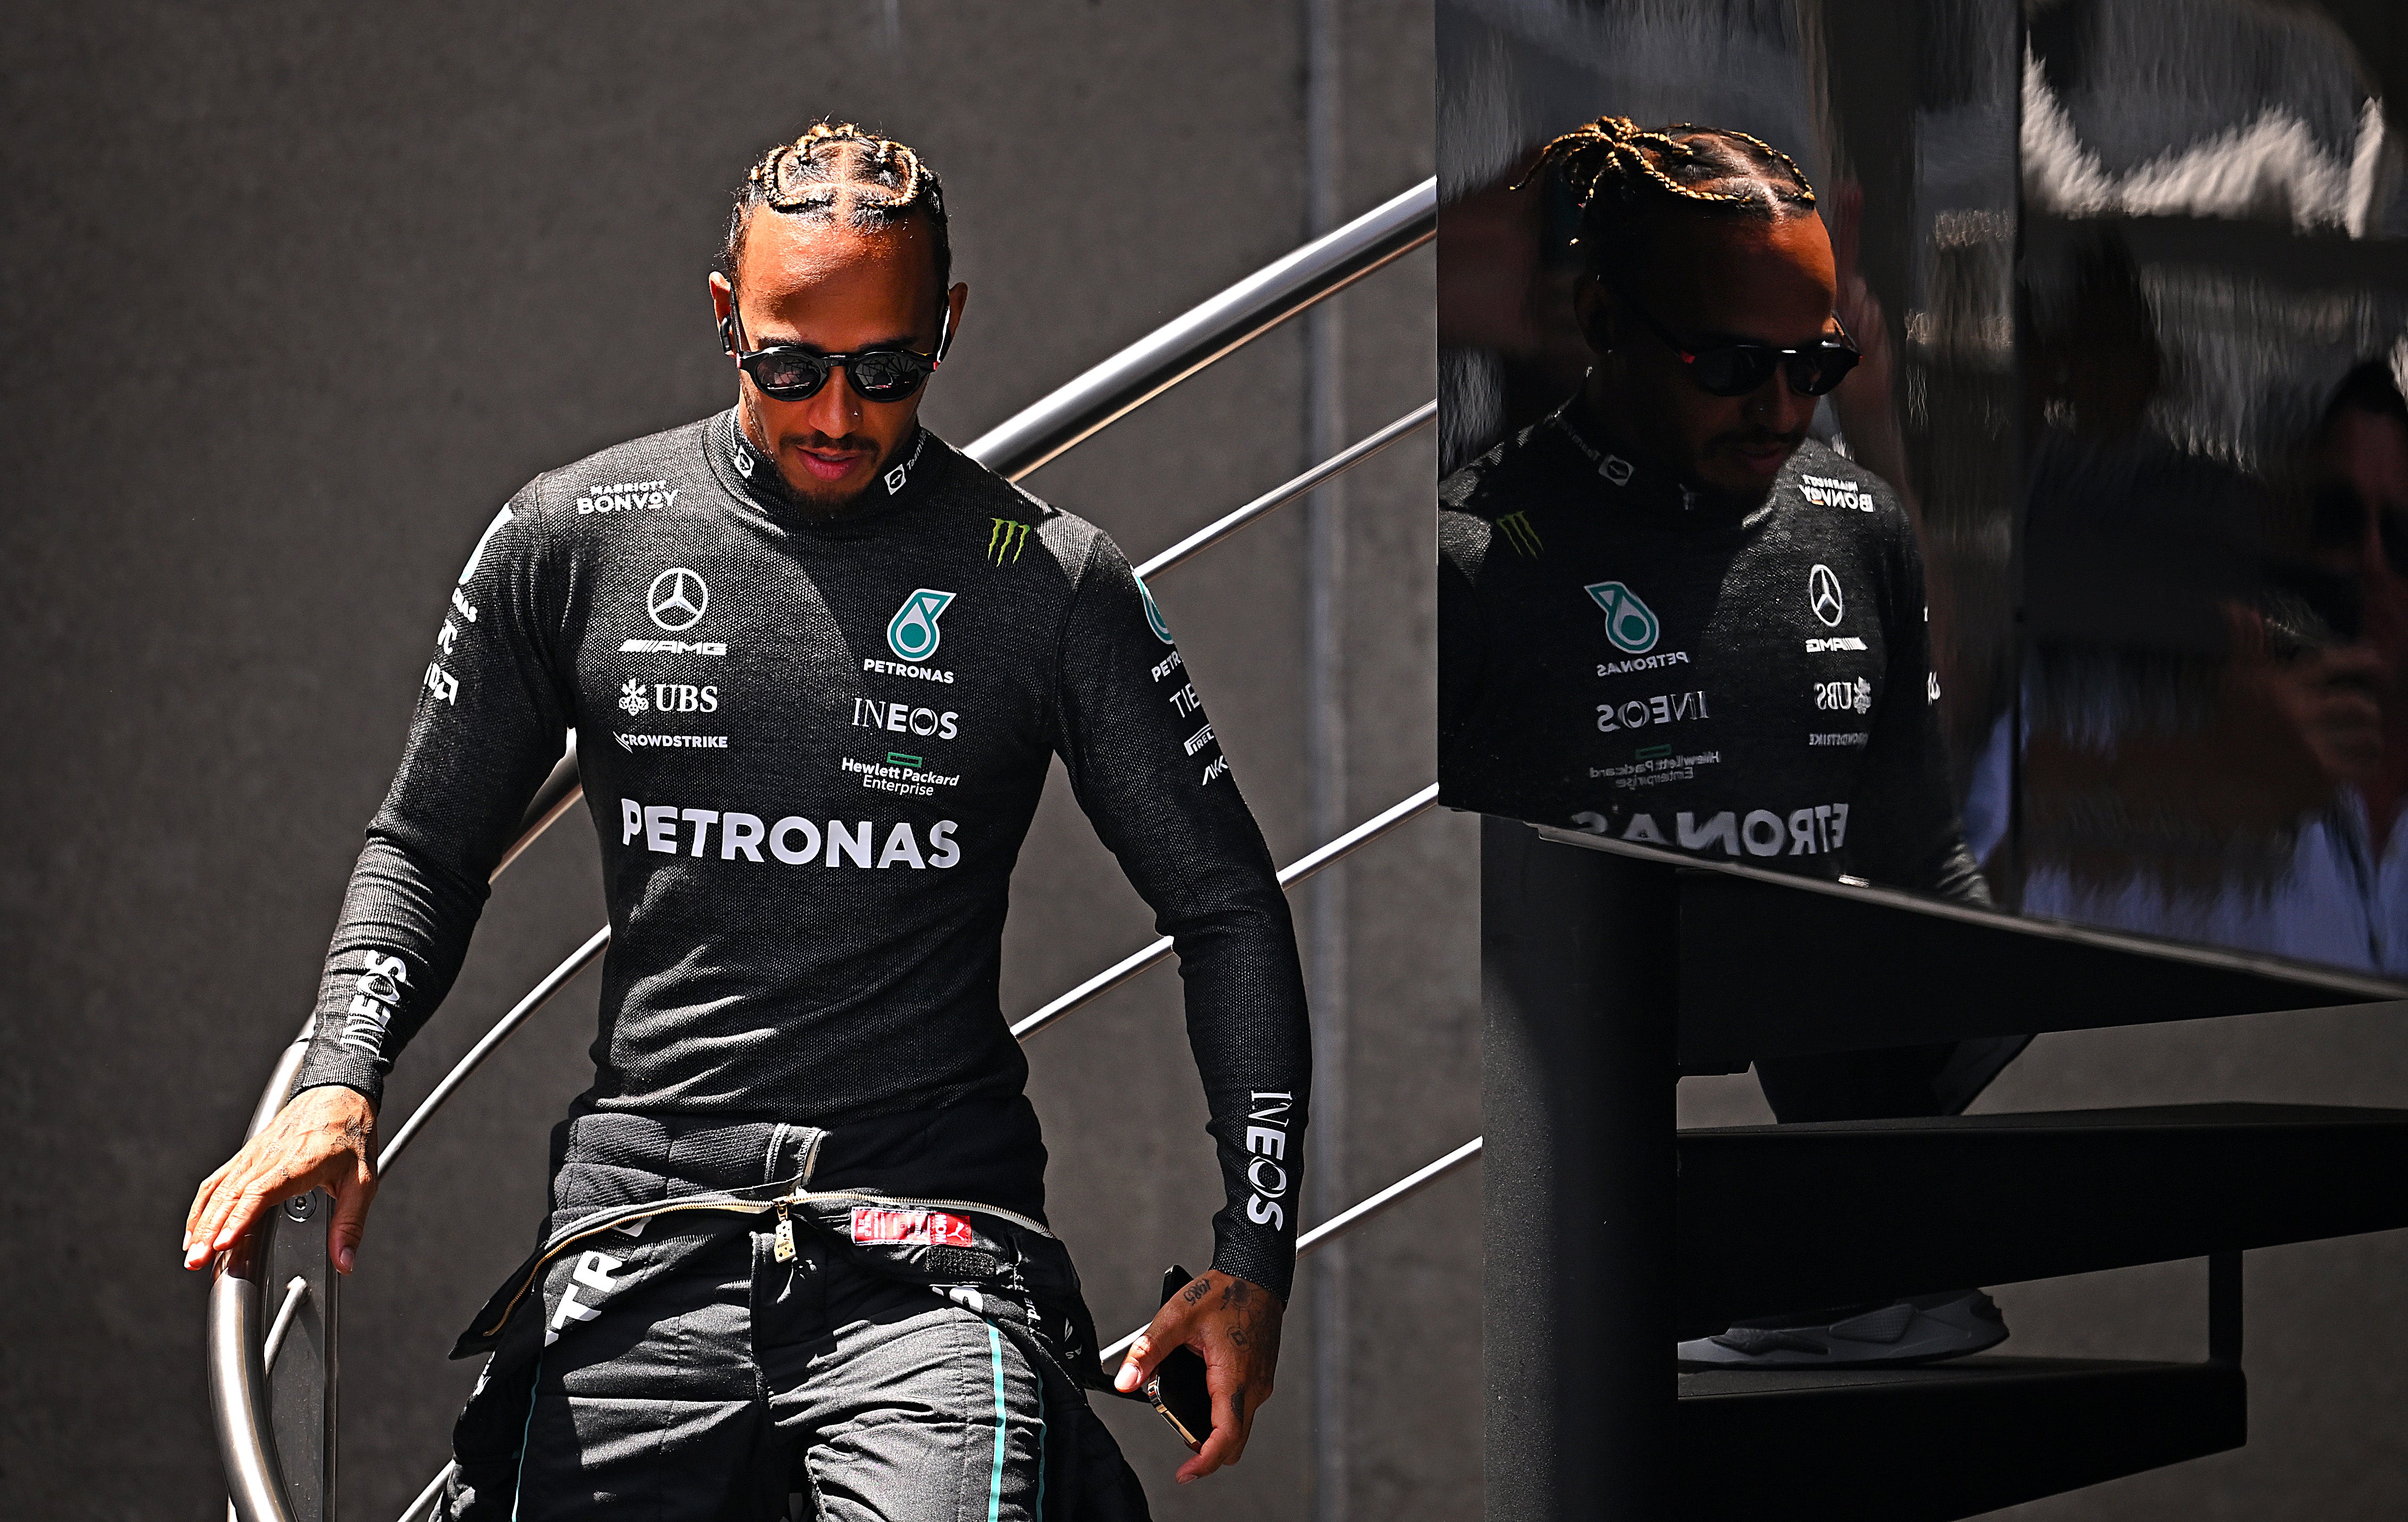 Lewis Hamilton is behind George Russell in the standings going into the Spanish Grand Prix